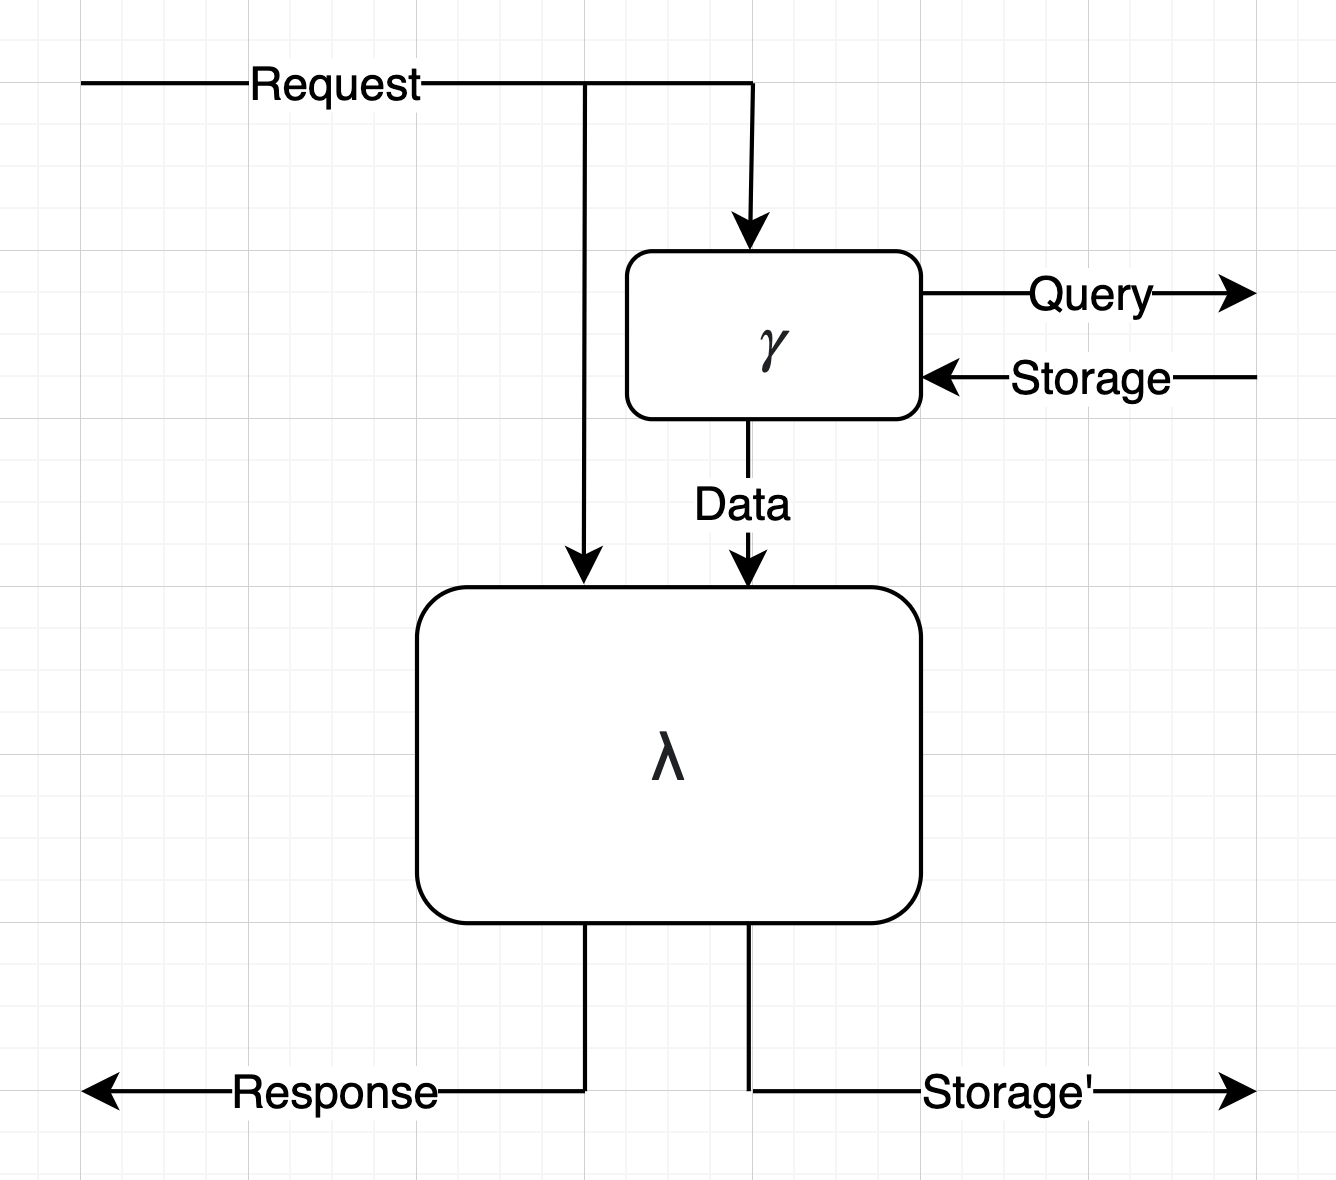 Diagram of a Server: input Request goes to the main process and a side process; the side process queries storage and passes data into the main process; the main process outputs a Response and updated Storage